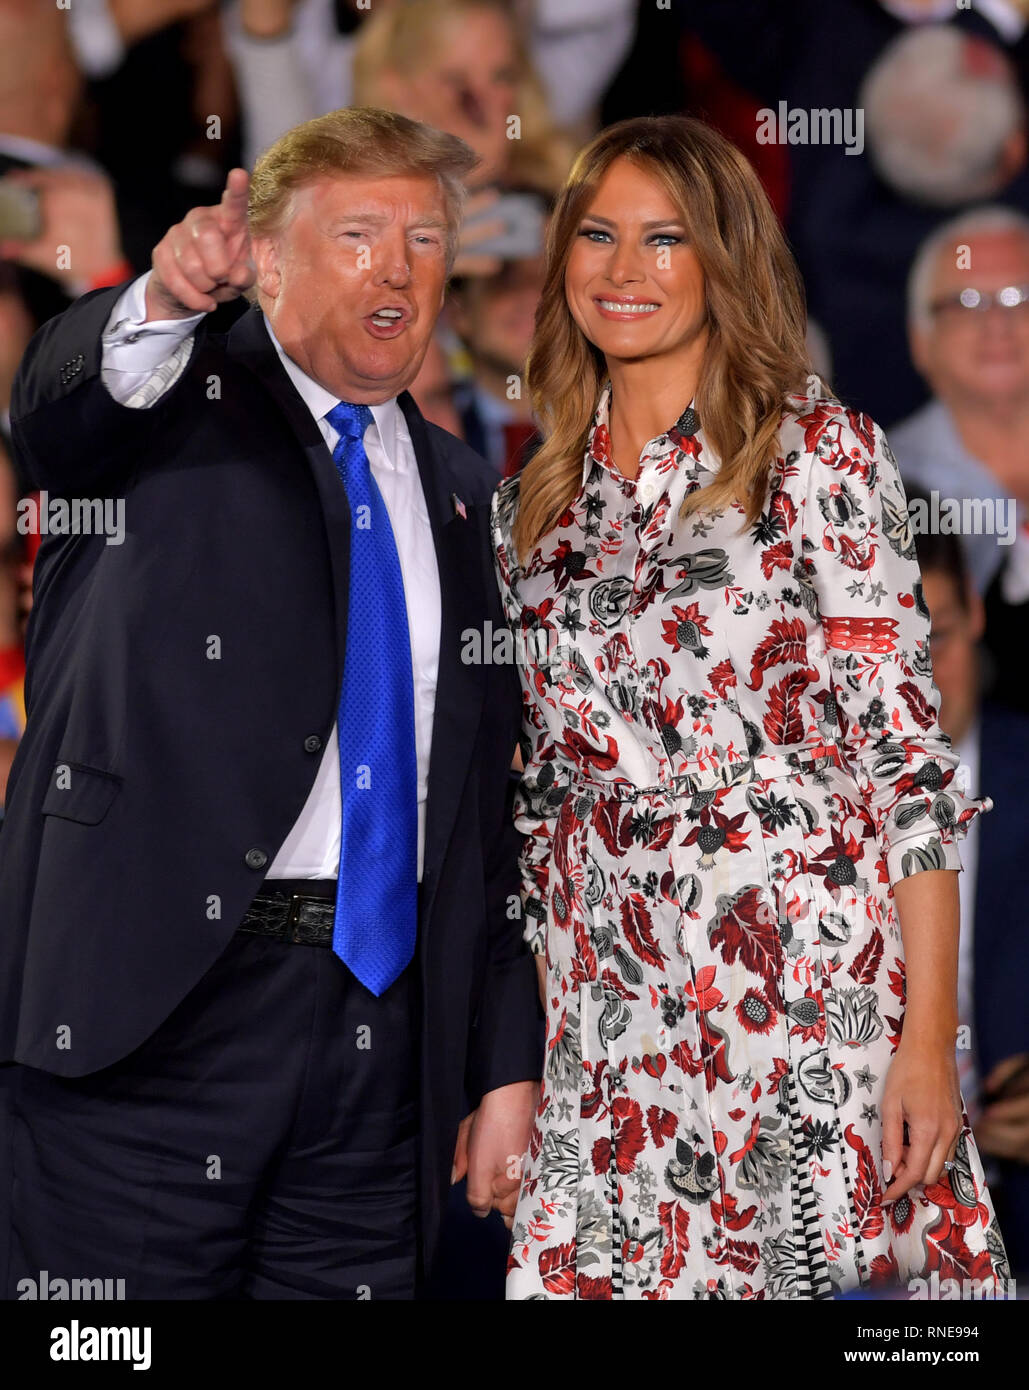 Miami, United States Of America. 18th Feb, 2019. President Donald Trump and First  Lady Melania Trump attend a rally at Florida International University on  February 18, 2019 in Miami, Florida. President Trump